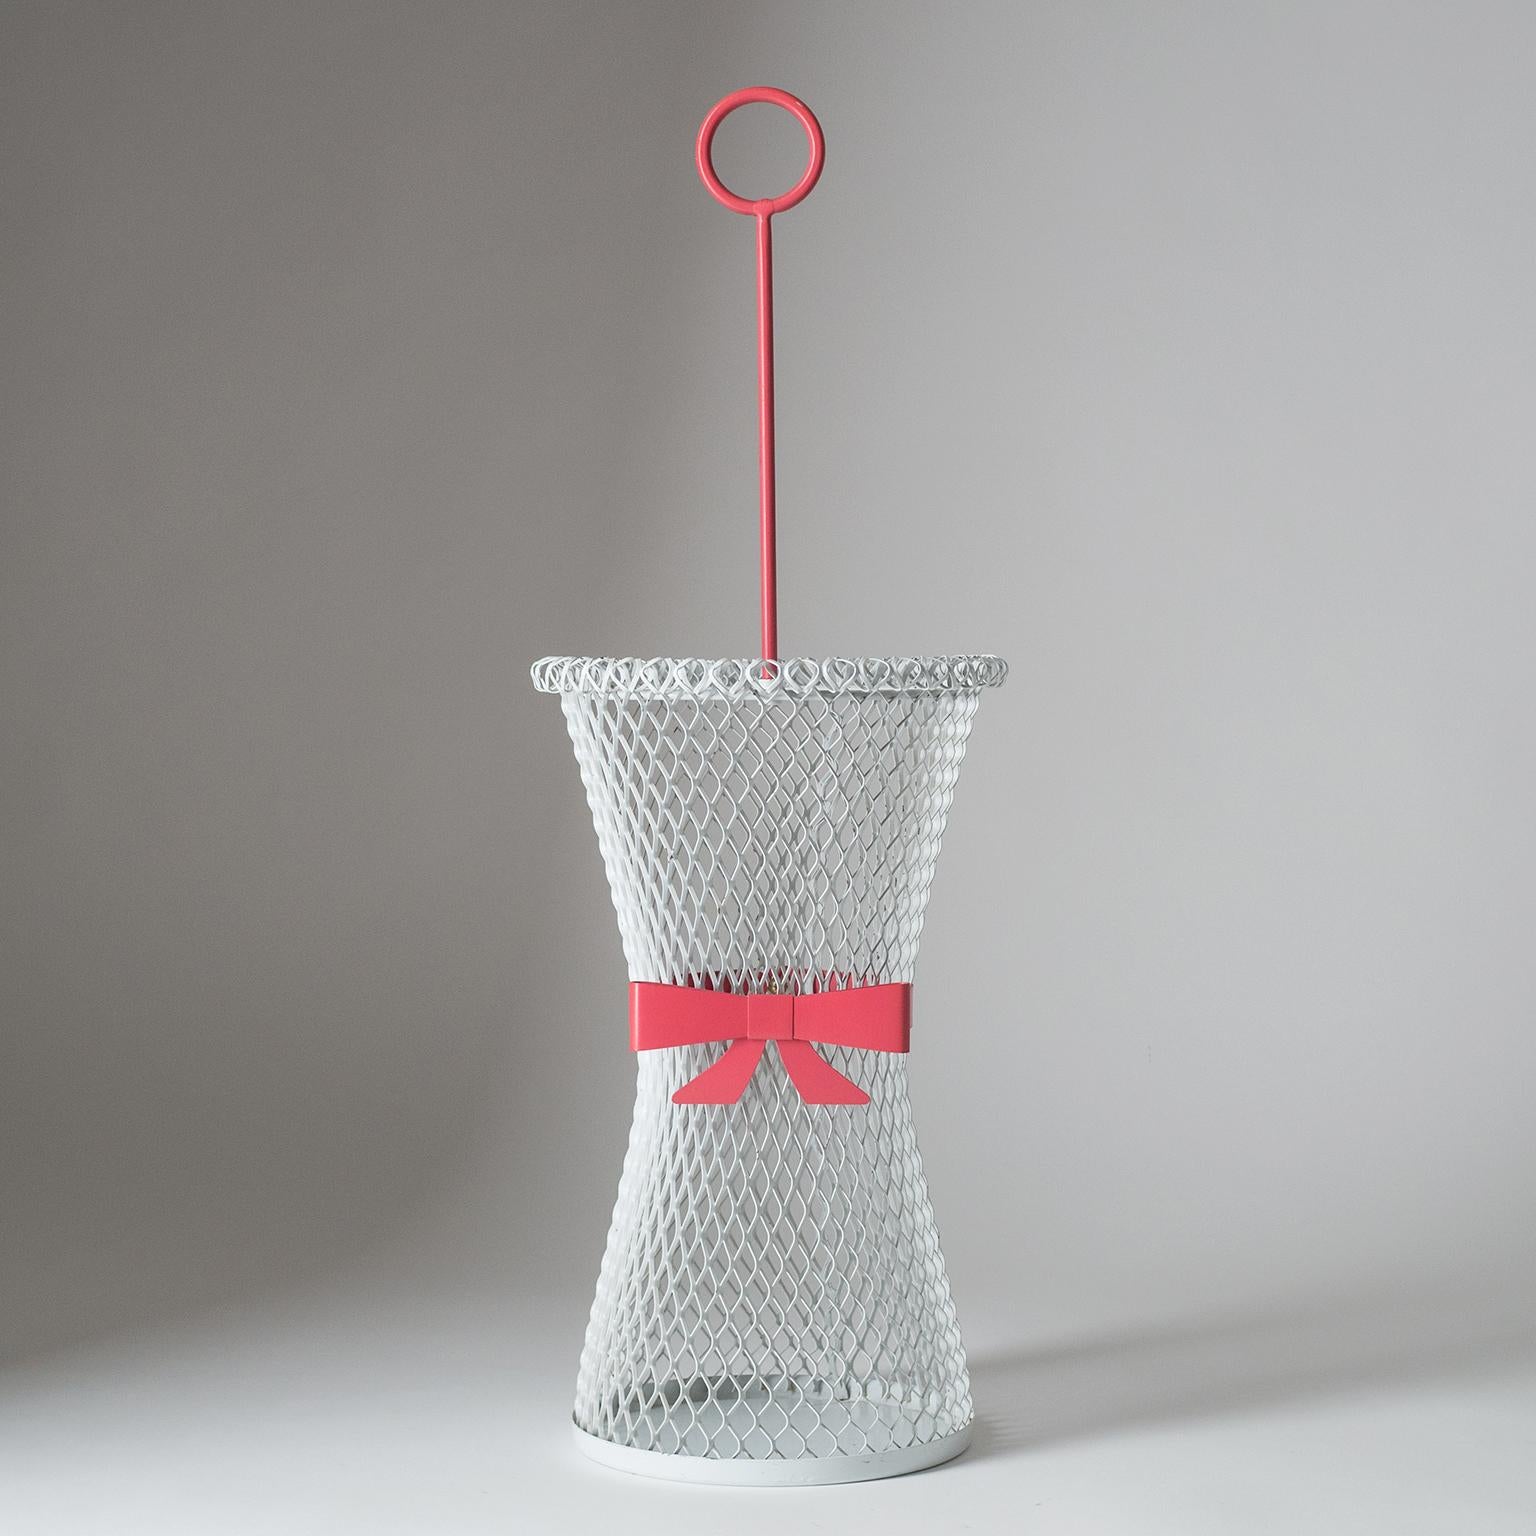 Charming Mategot-style umbrella stand from the 1950s. Expanded steel tapered body enameled in white with contrasting grip and ribbon around the 'waist'.